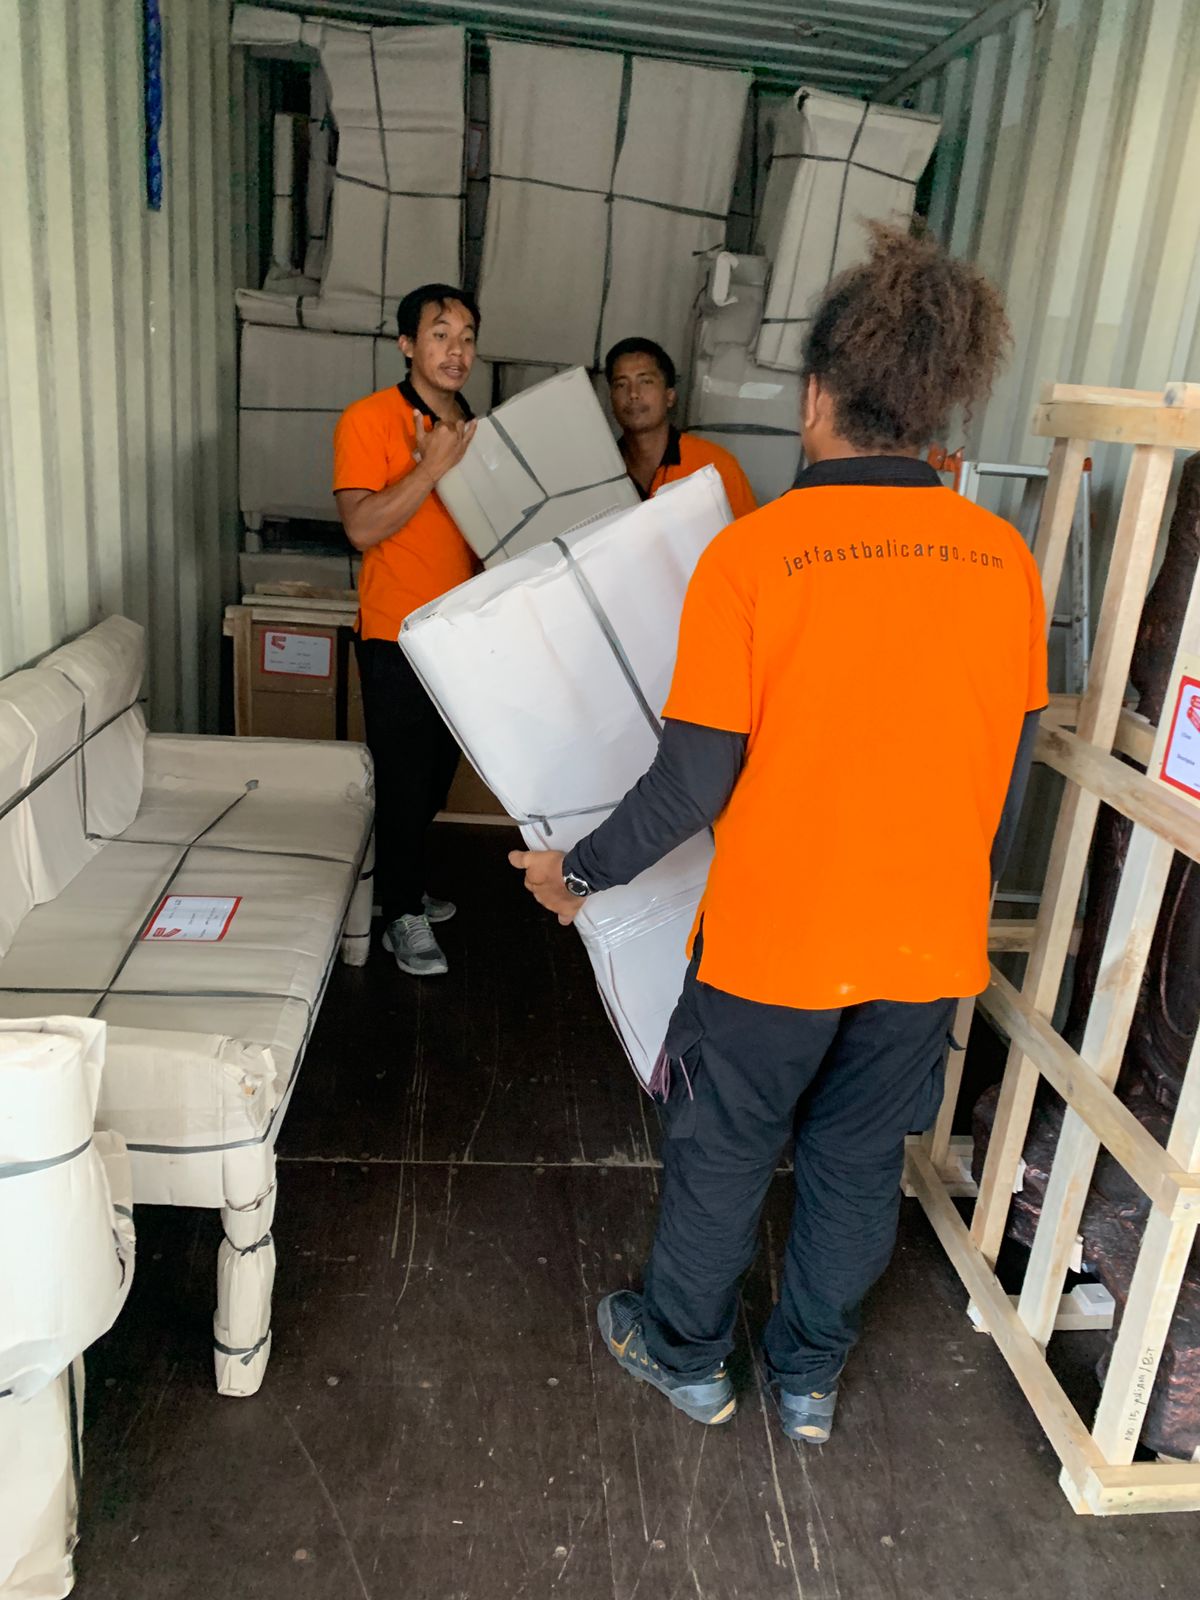 Shipping Container From Bali to Brisbane